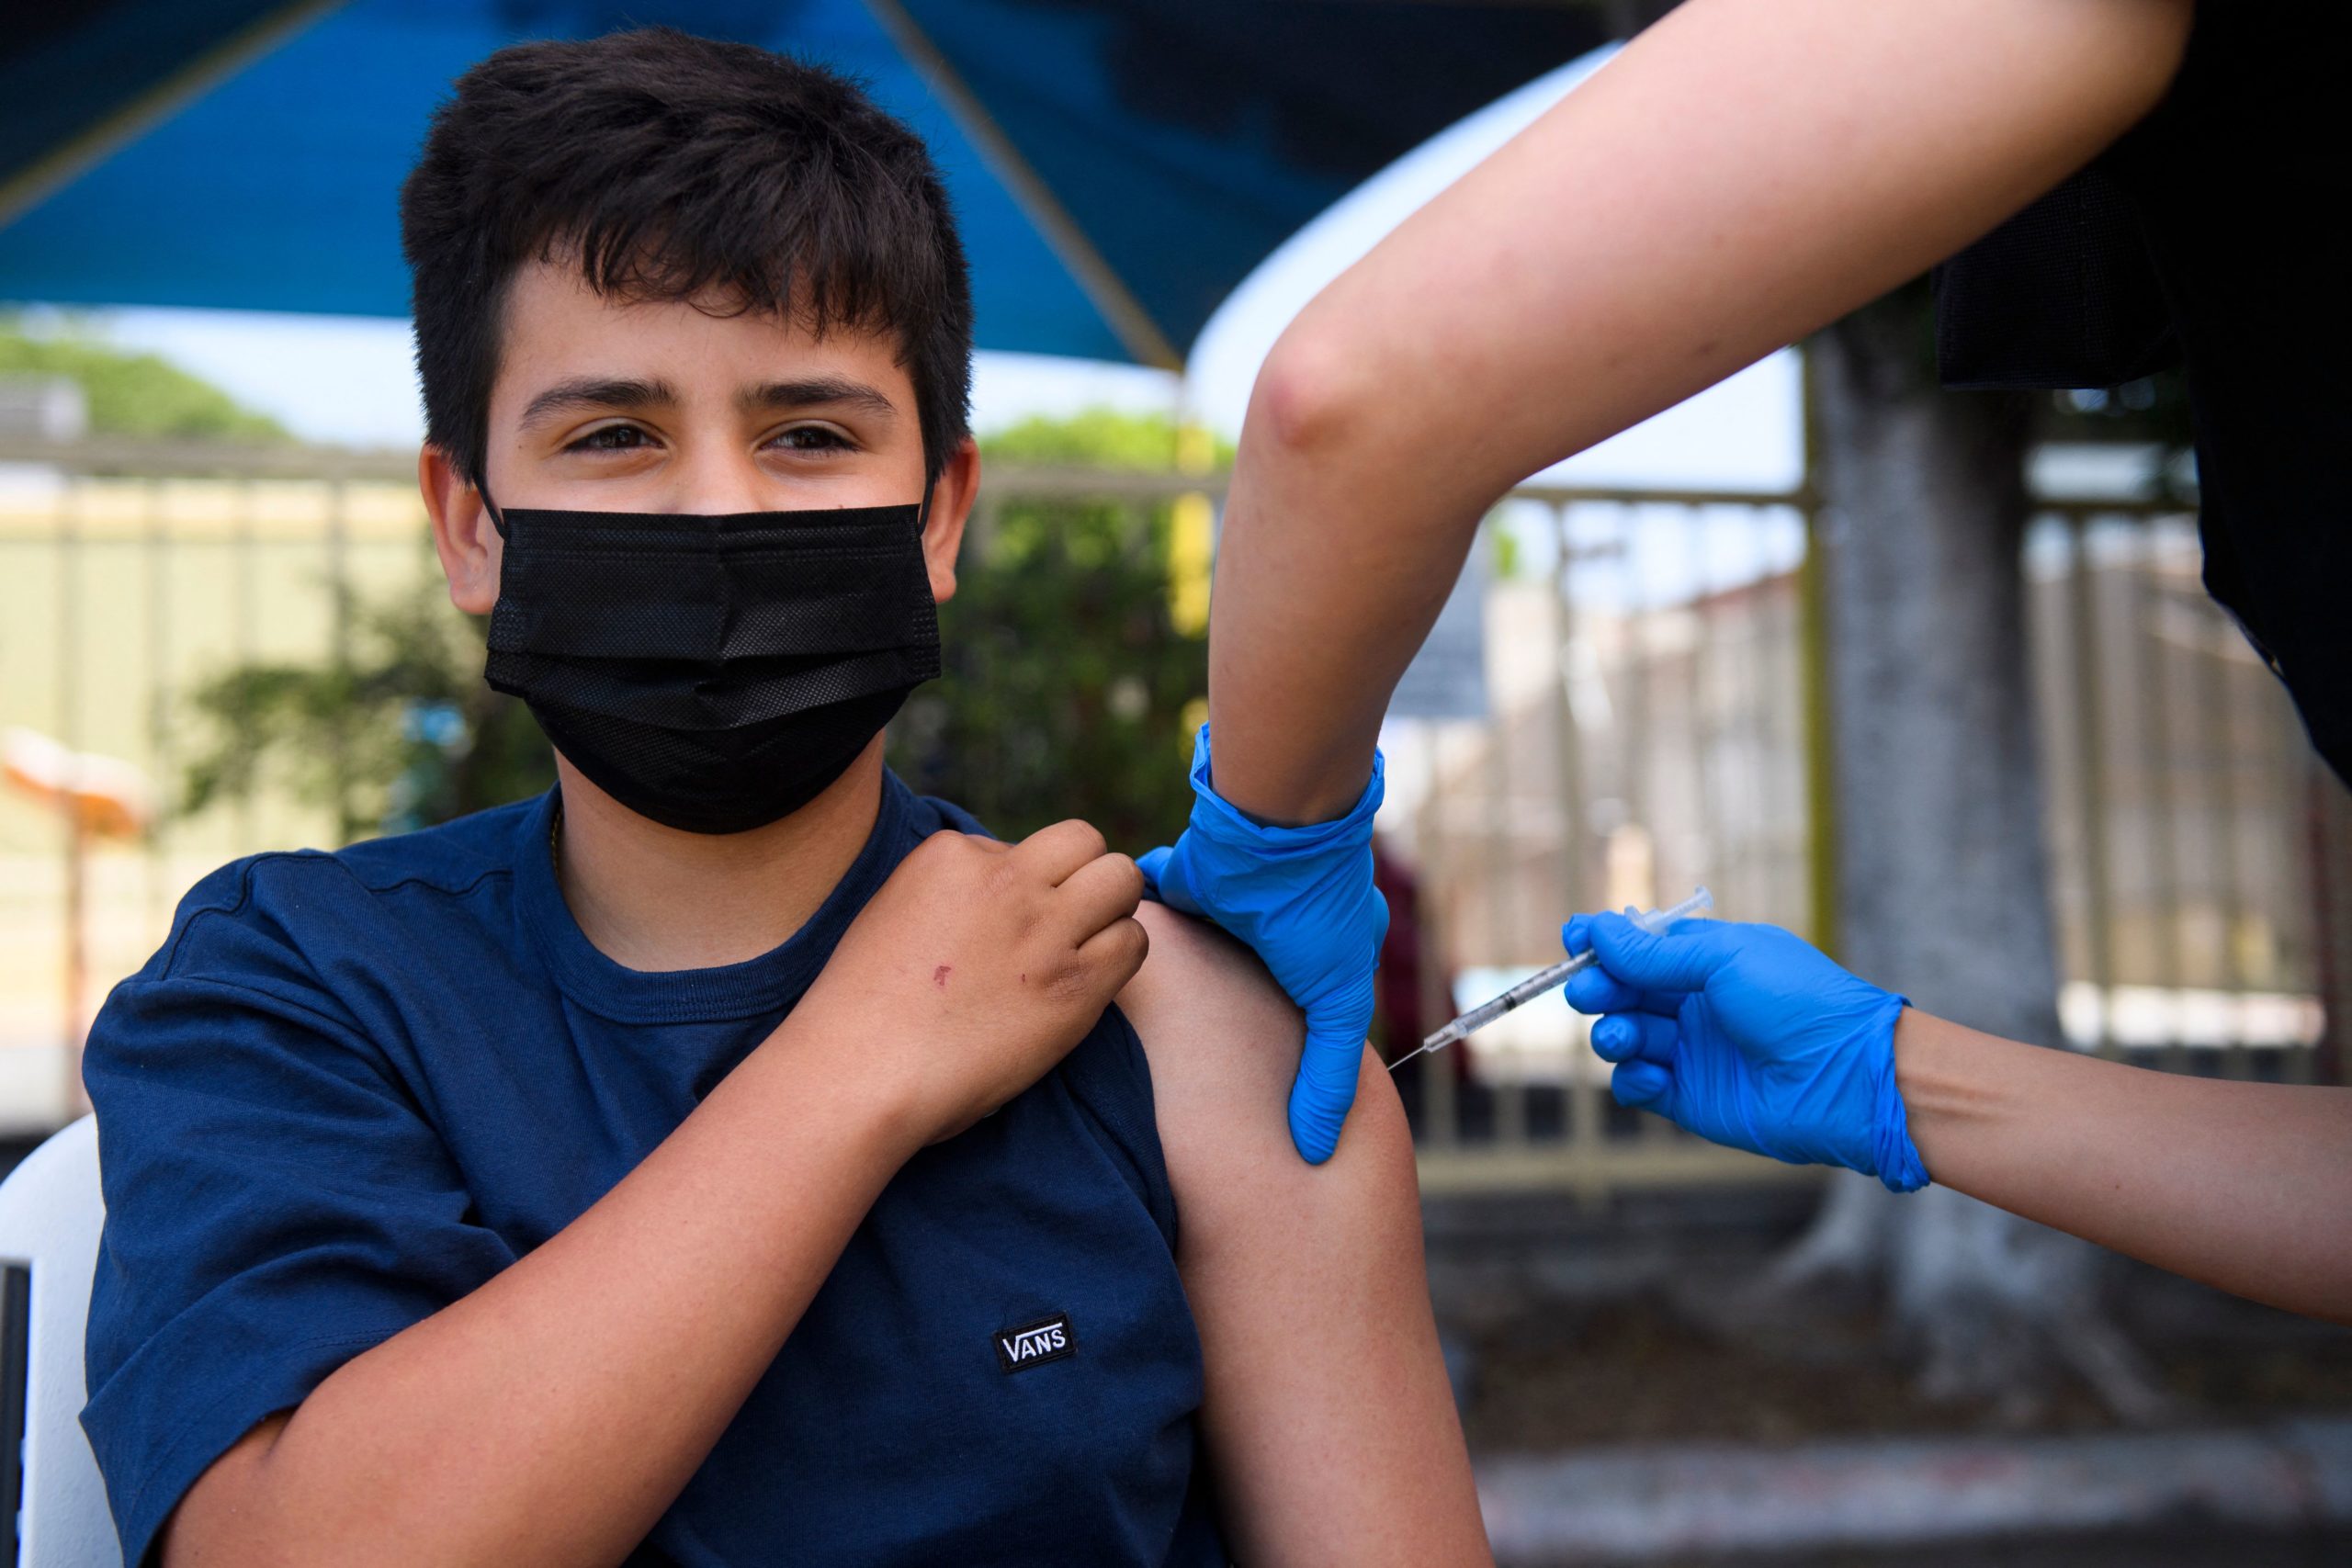 Simon Huizar, 13, receives a Pfizer COVID-19 vaccine at a mobile vaccination clinic at the Weingart East Los Angeles YMCA in this file photo from May 2021. Under a proposed new law, California children 12 and older could get vaccinated without parental permission.